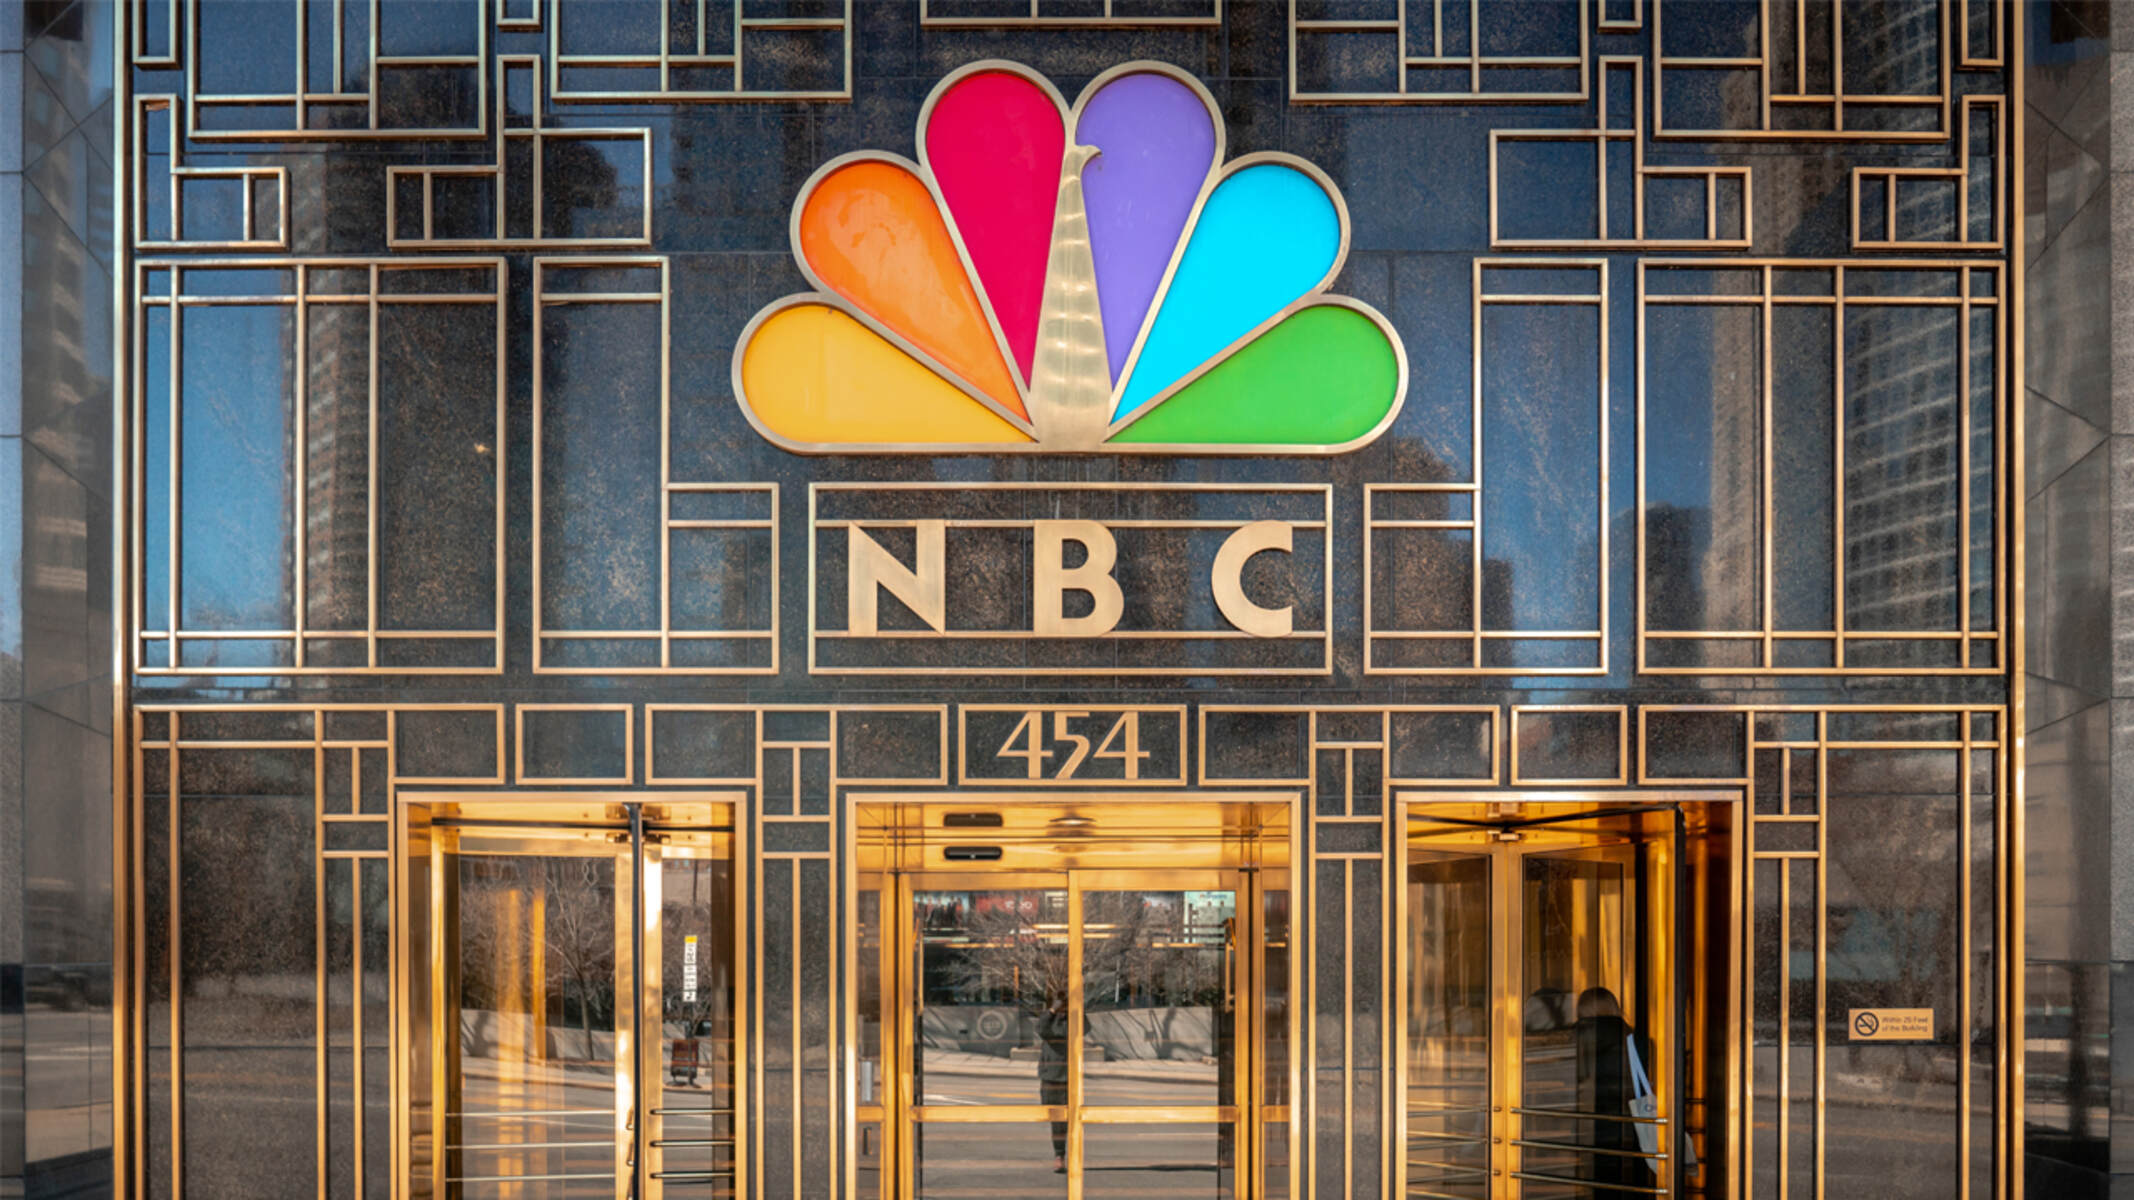 How To Watch Nbc Live For Free